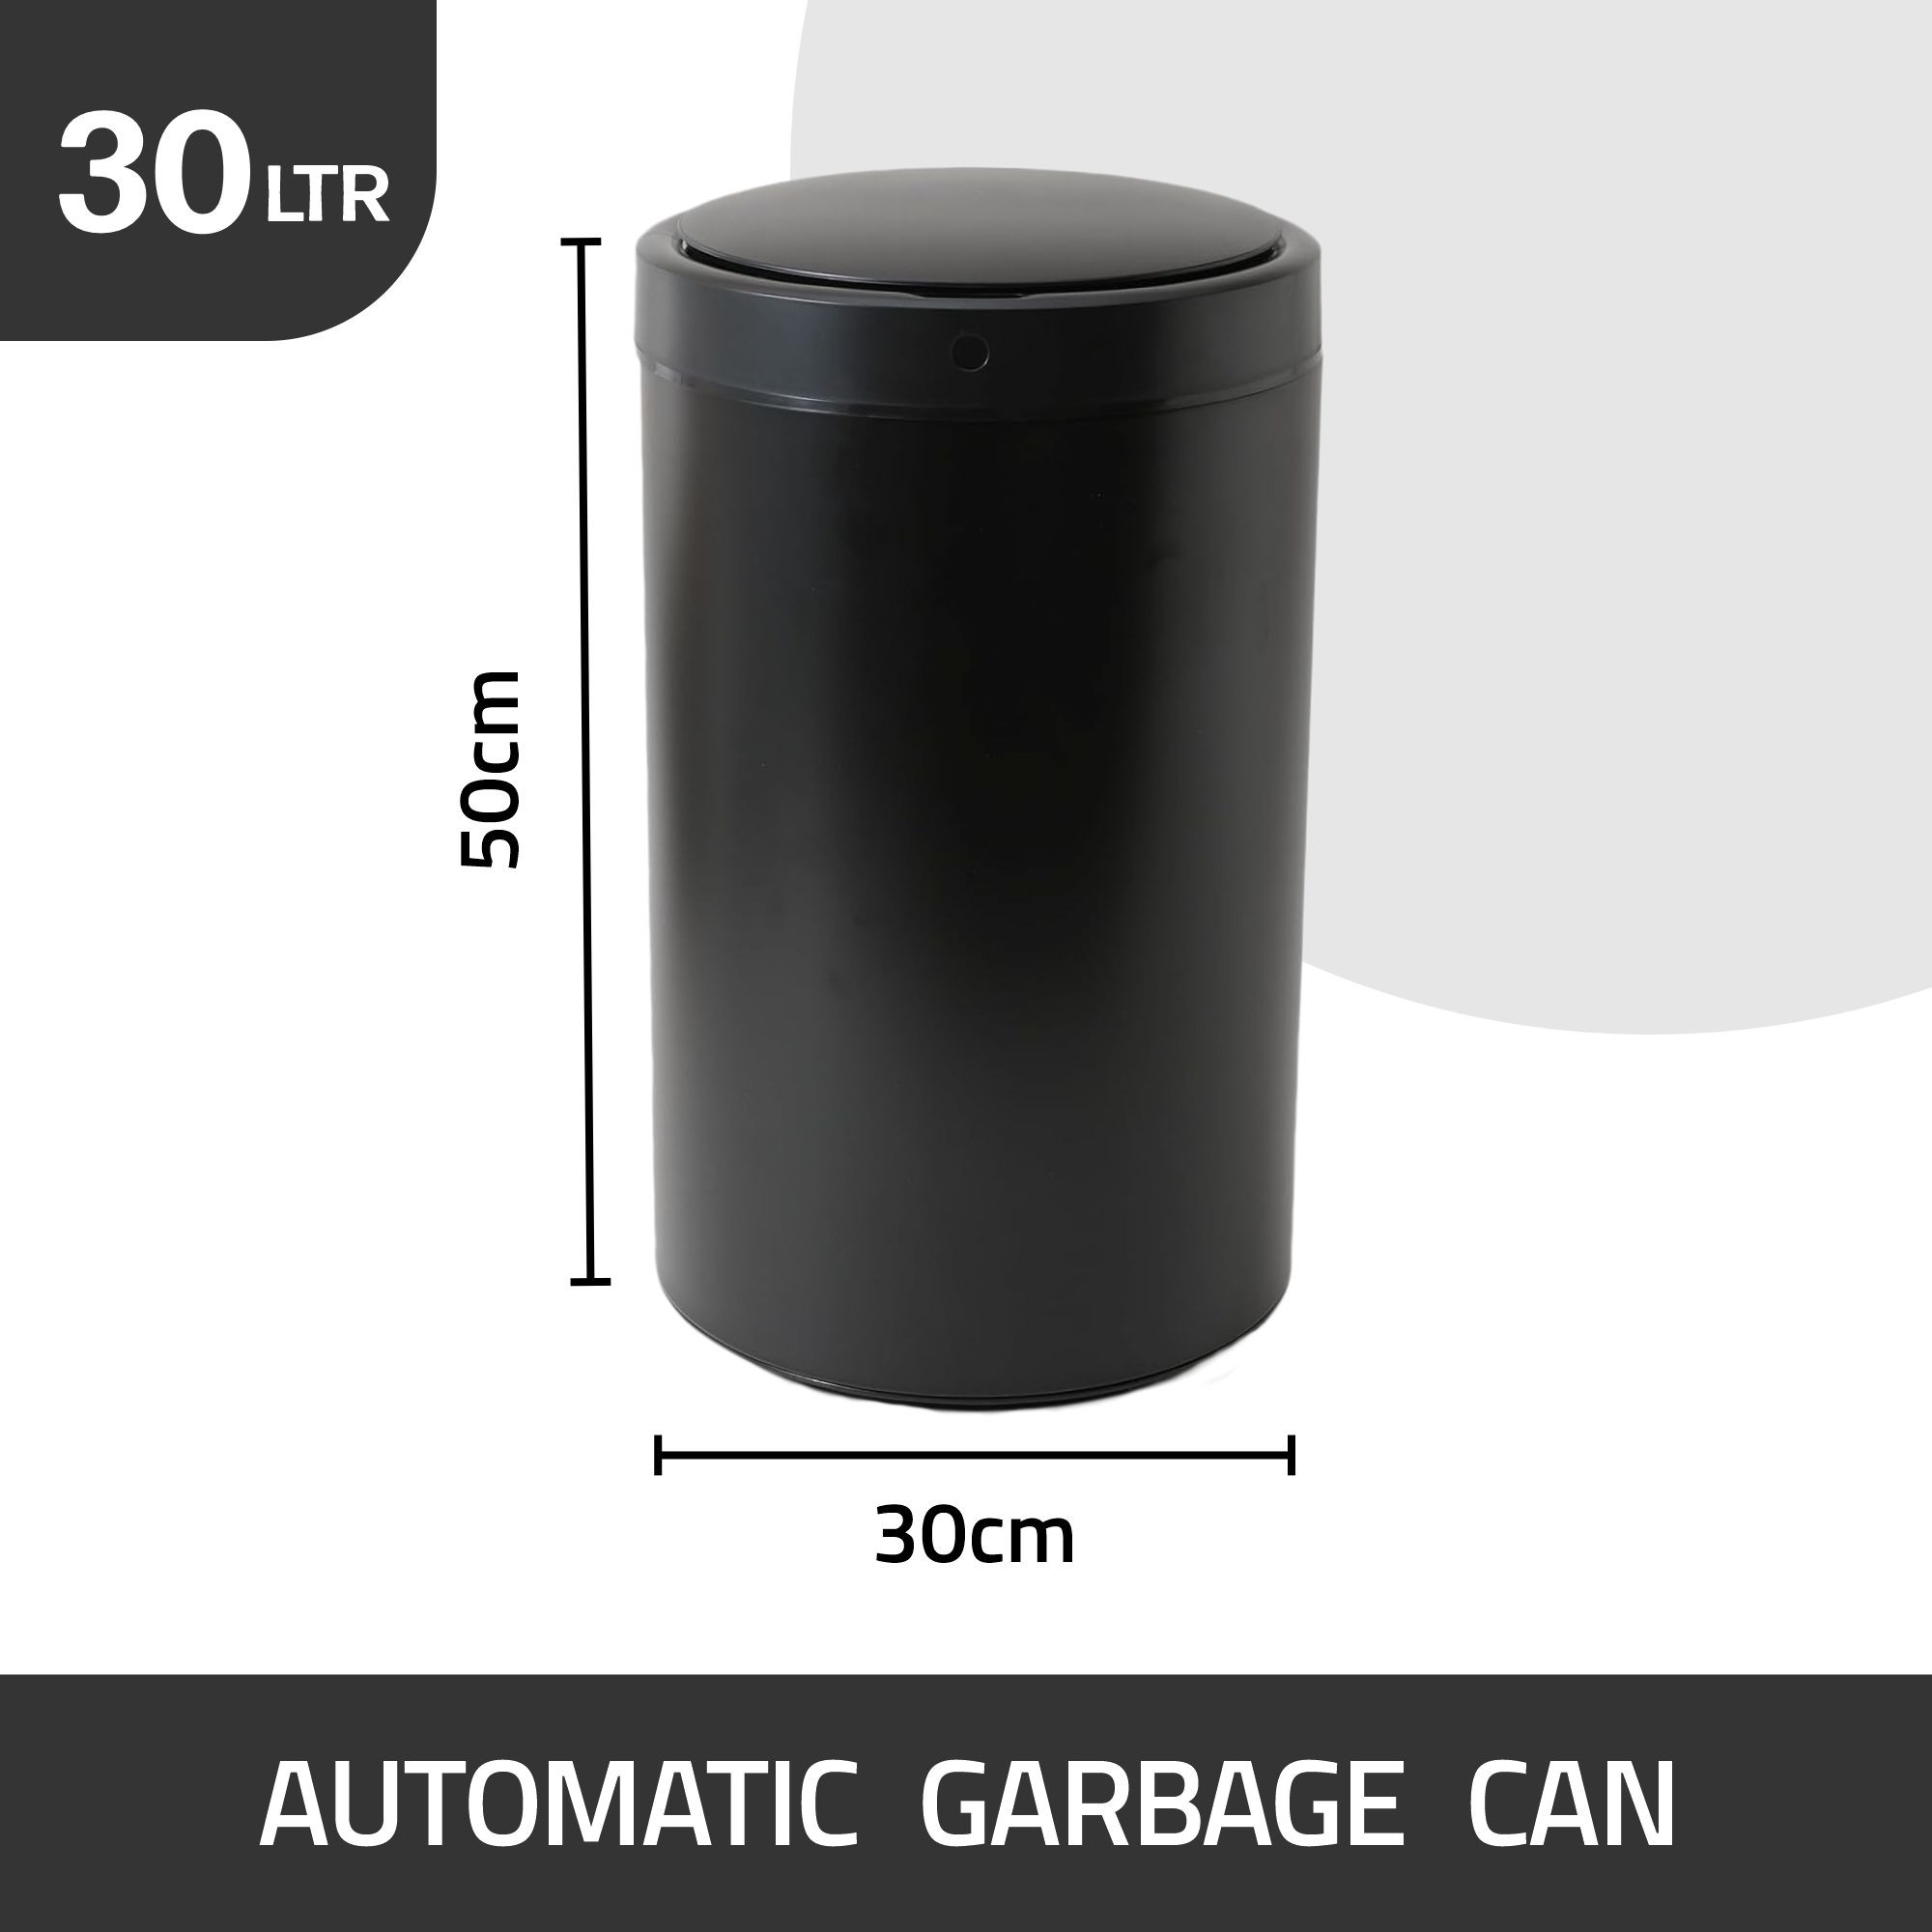 Kuber Industries Sensor Dustbin | Round Big Sensor Dustbin | Touchless Trash Can | Smart Dustbin for Bedroom-Office-Living Room | Automatic Garbage Can | HN-ZR-BLK-30L | Black